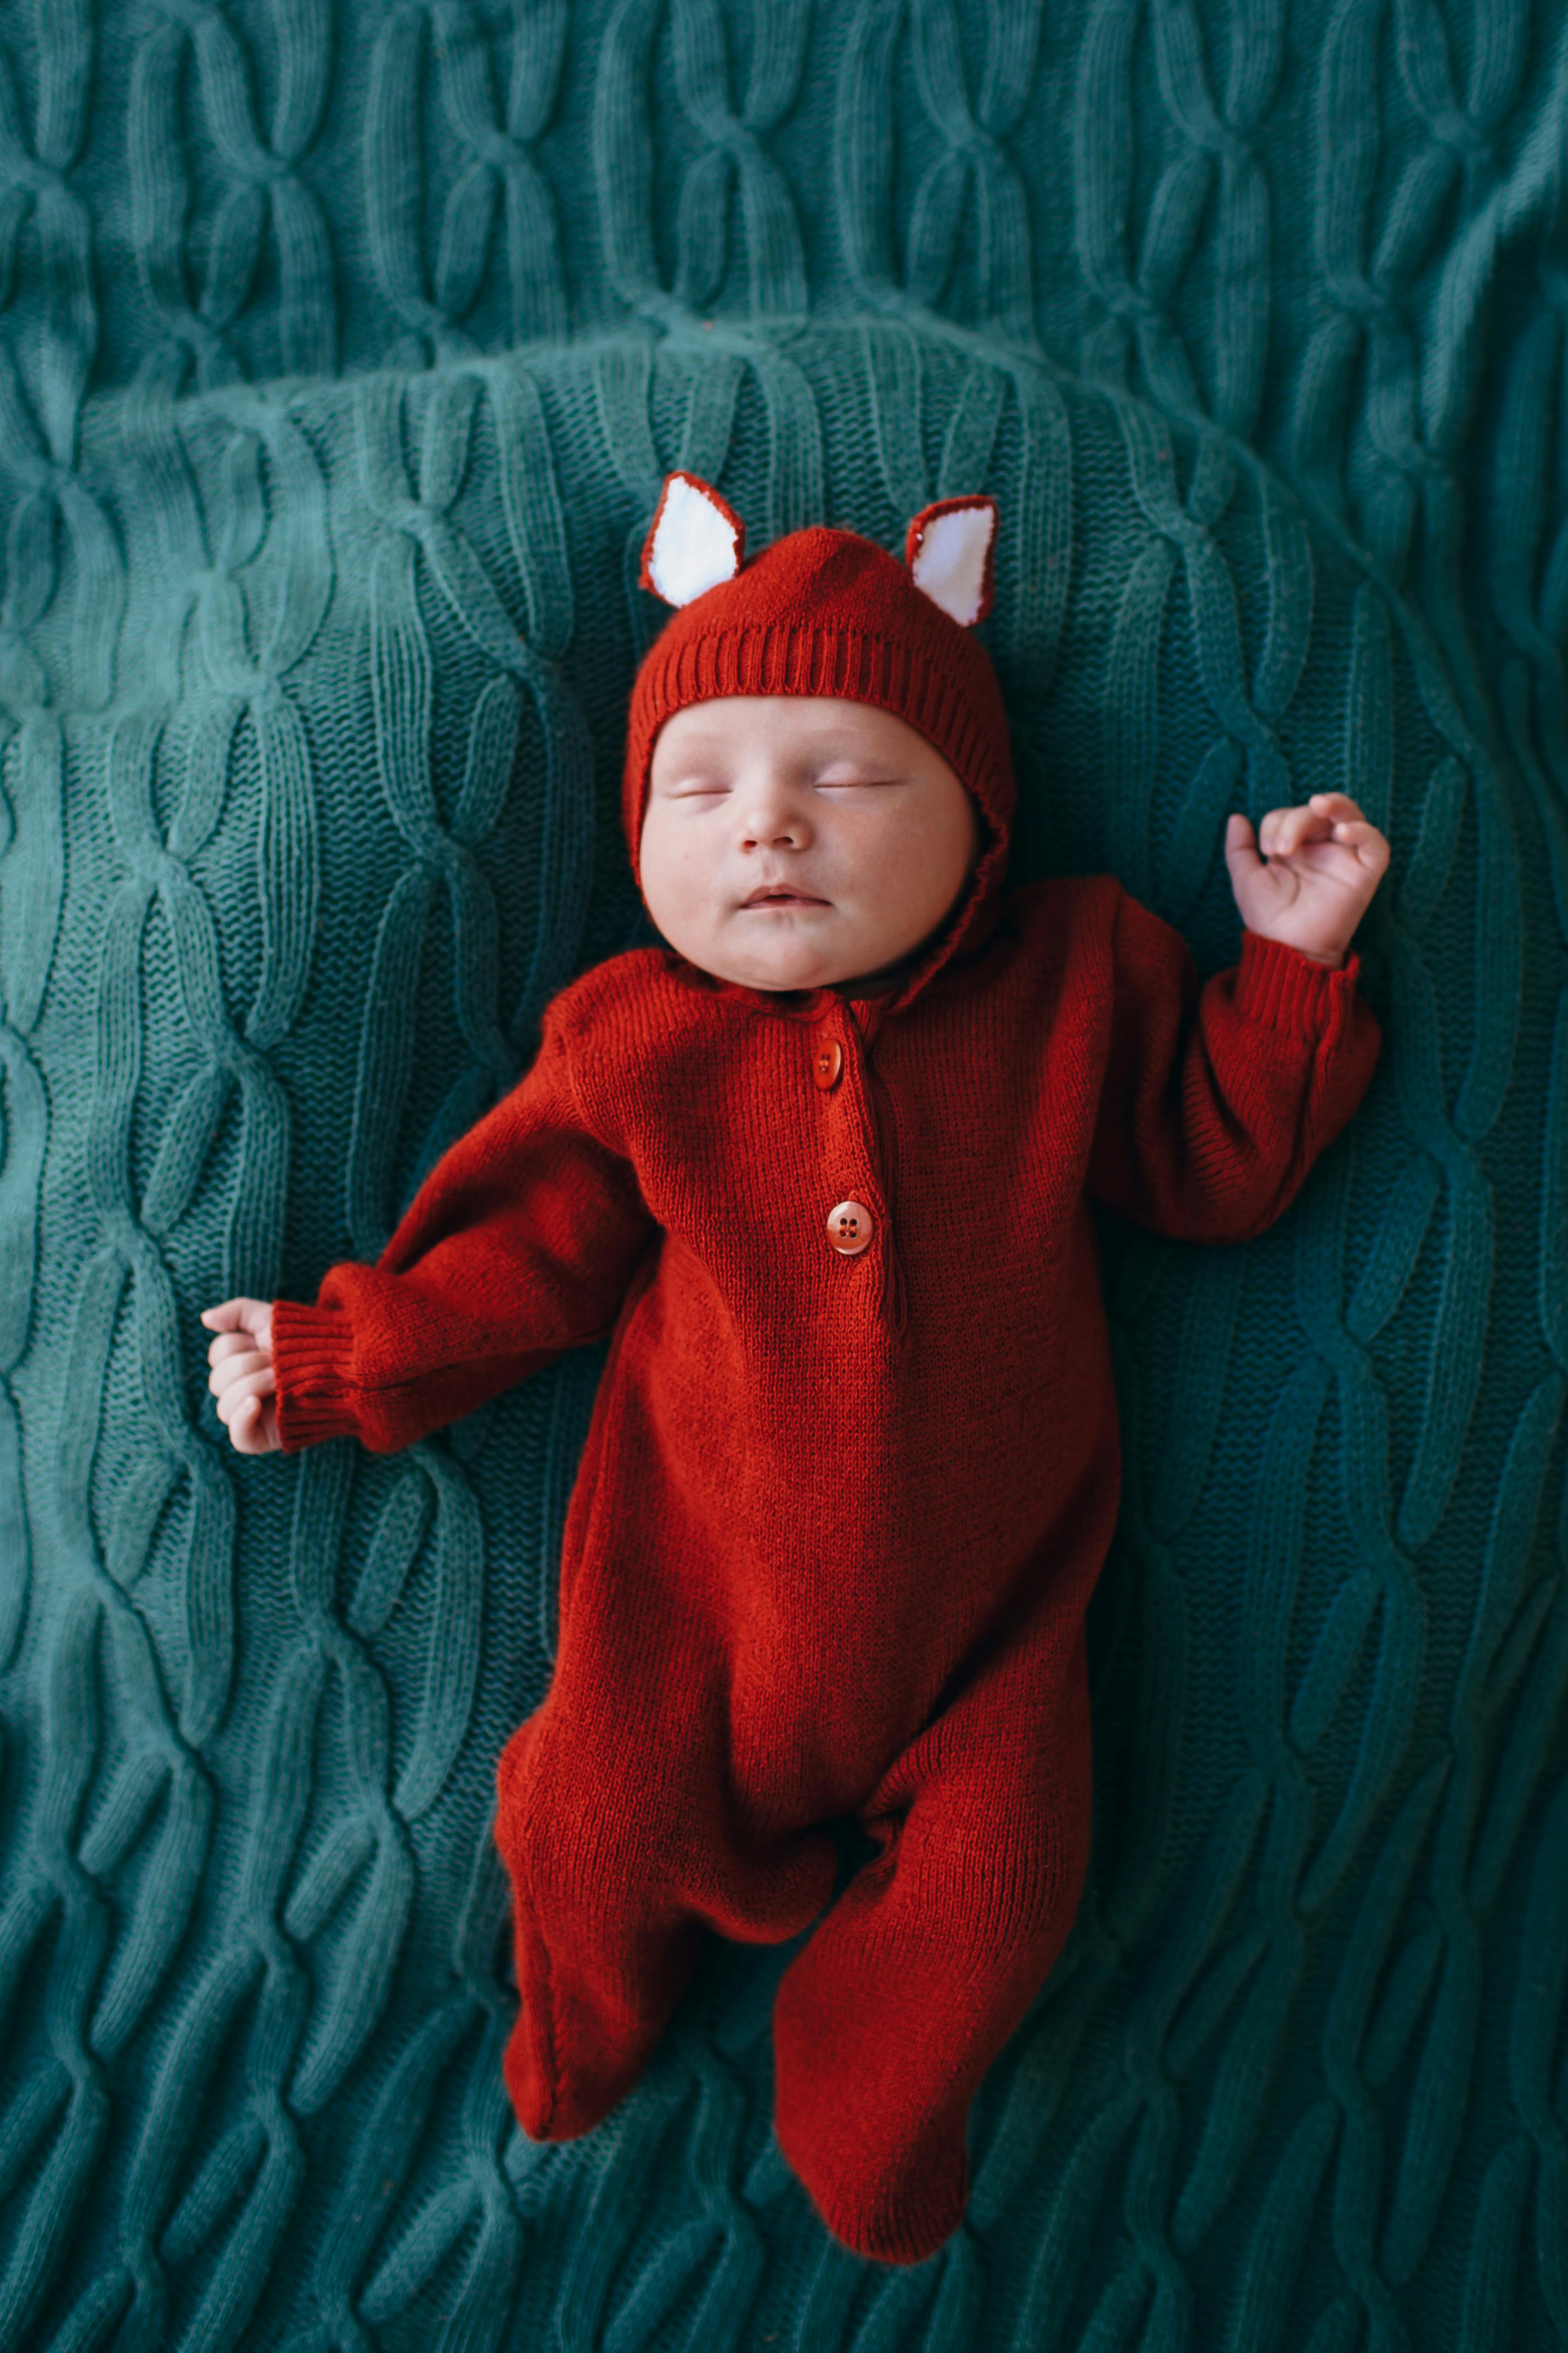 cute little baby in funny red woolen costume with ears